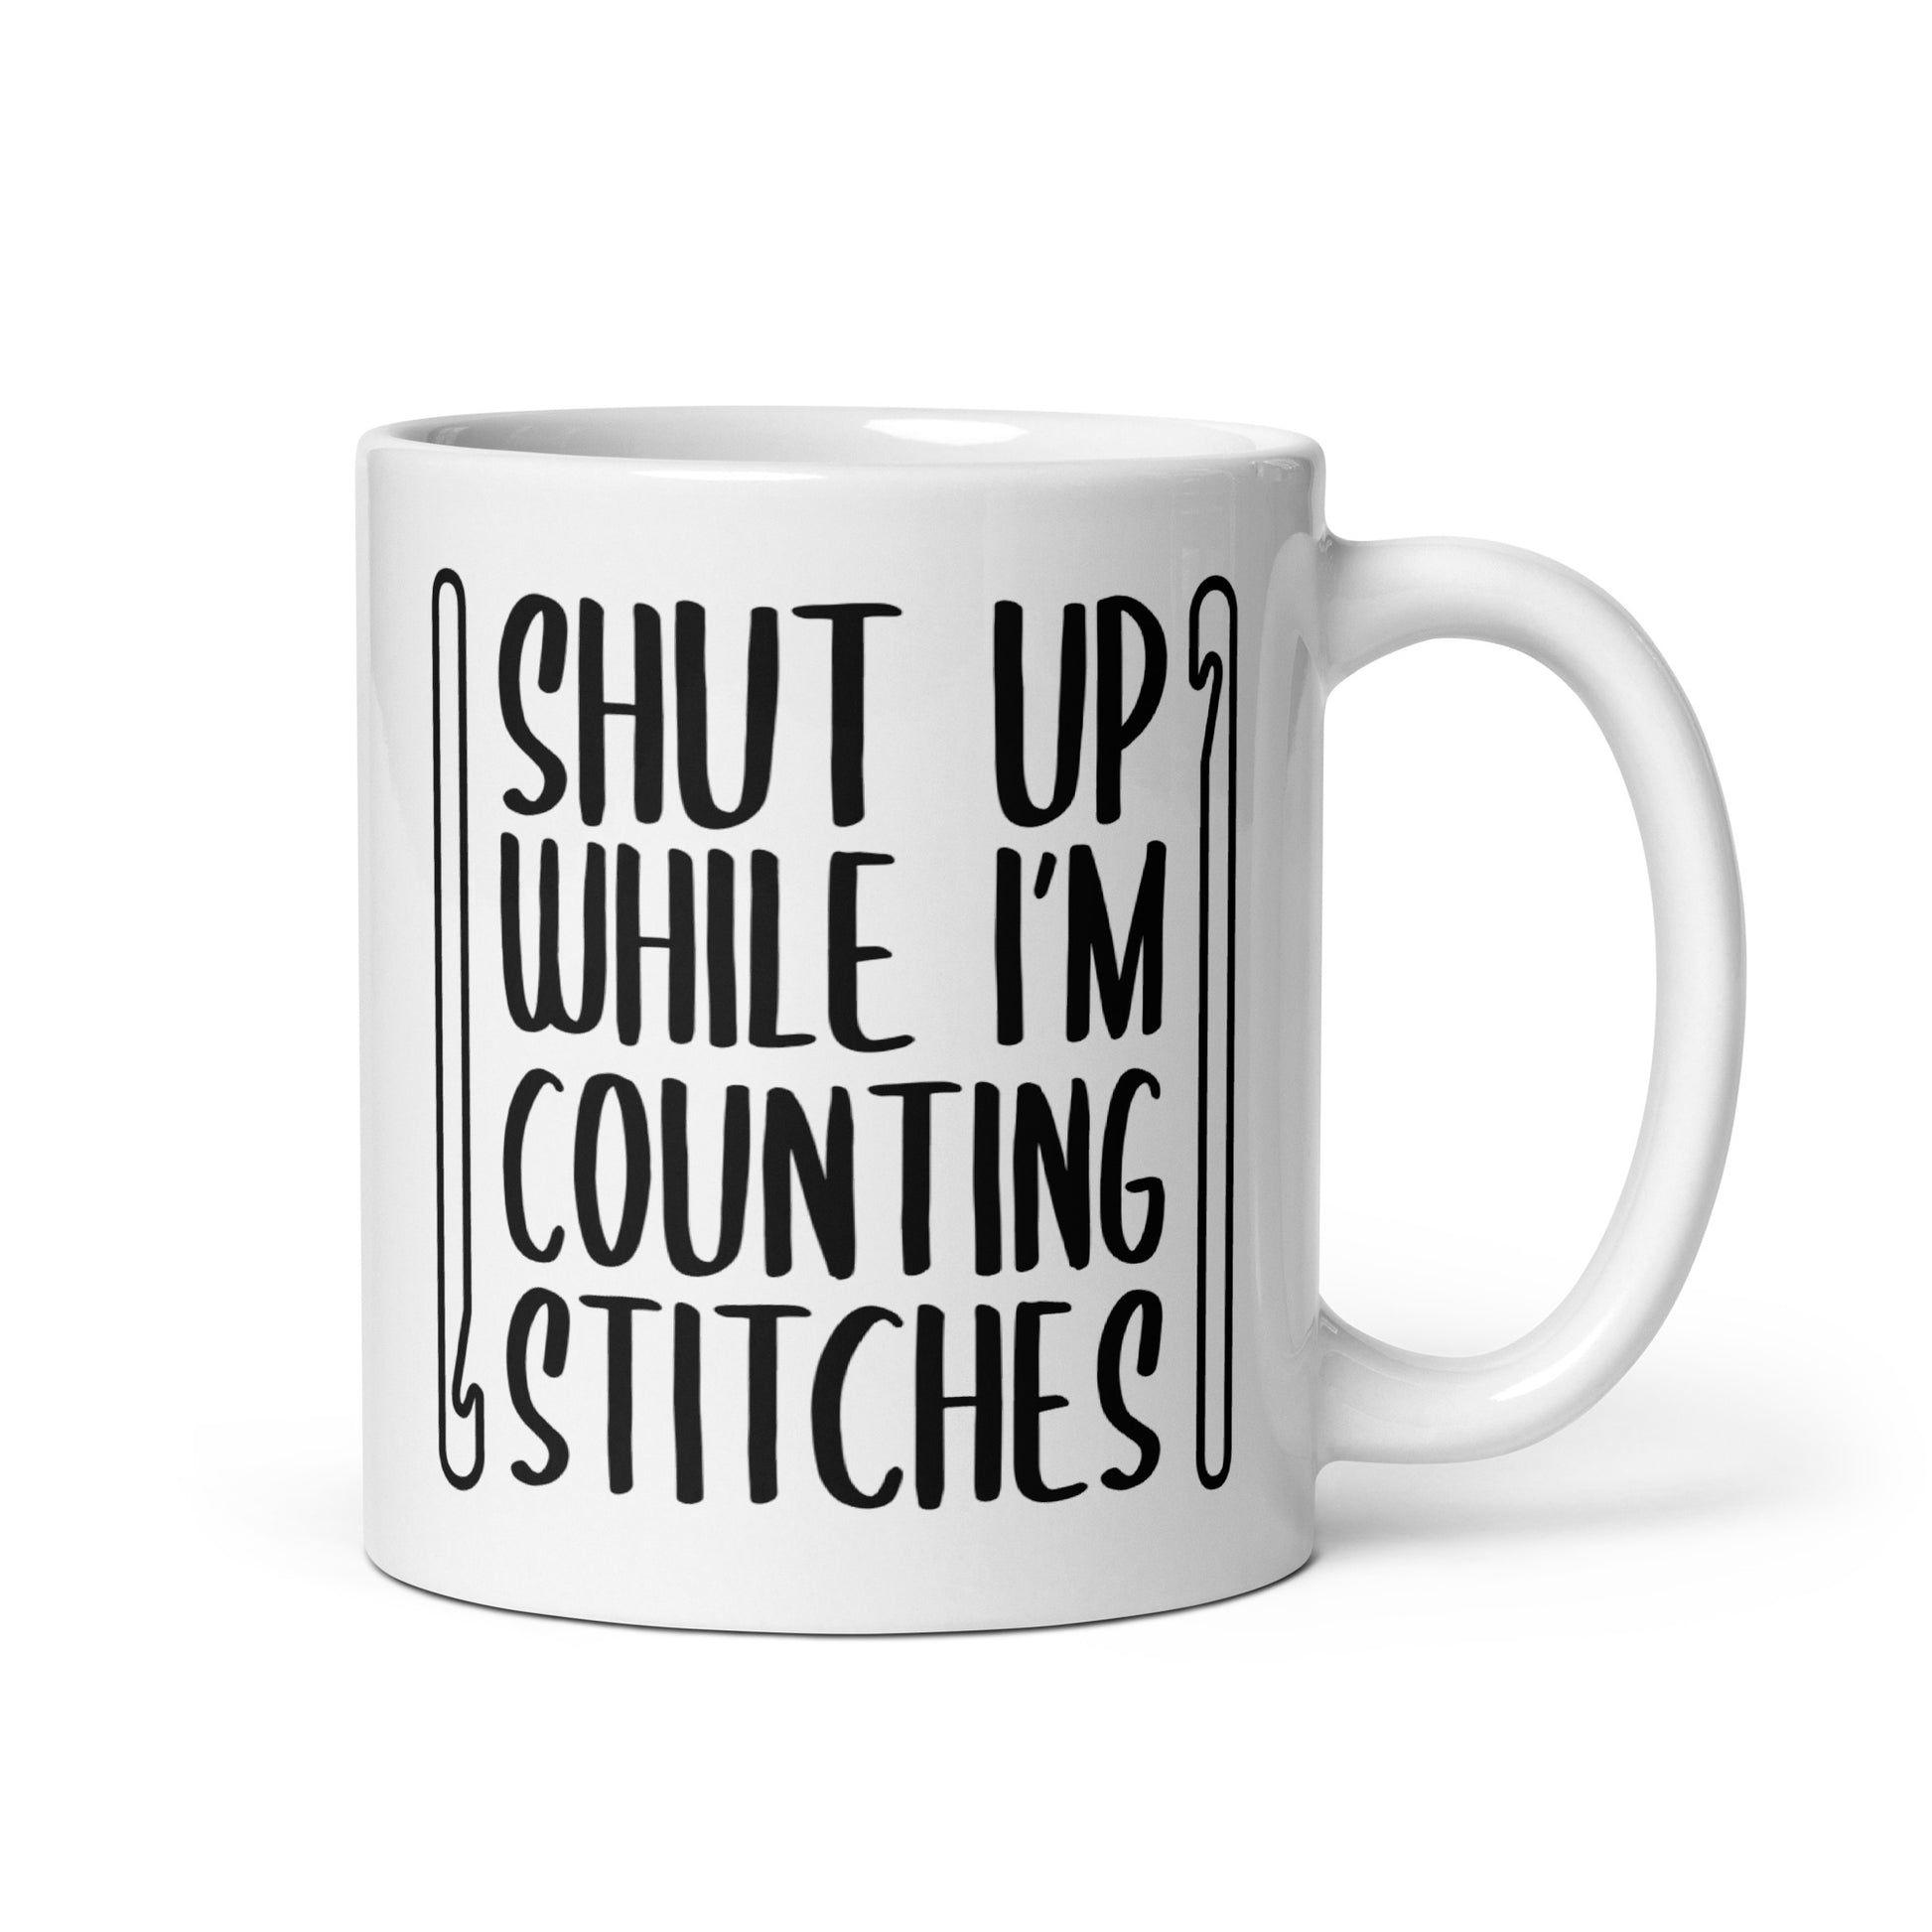 A white 11 ounce, ceramic mug featuring black text that reads "Shut up while I'm counting stitches." The text is framed by a crochet hook to the left and right.